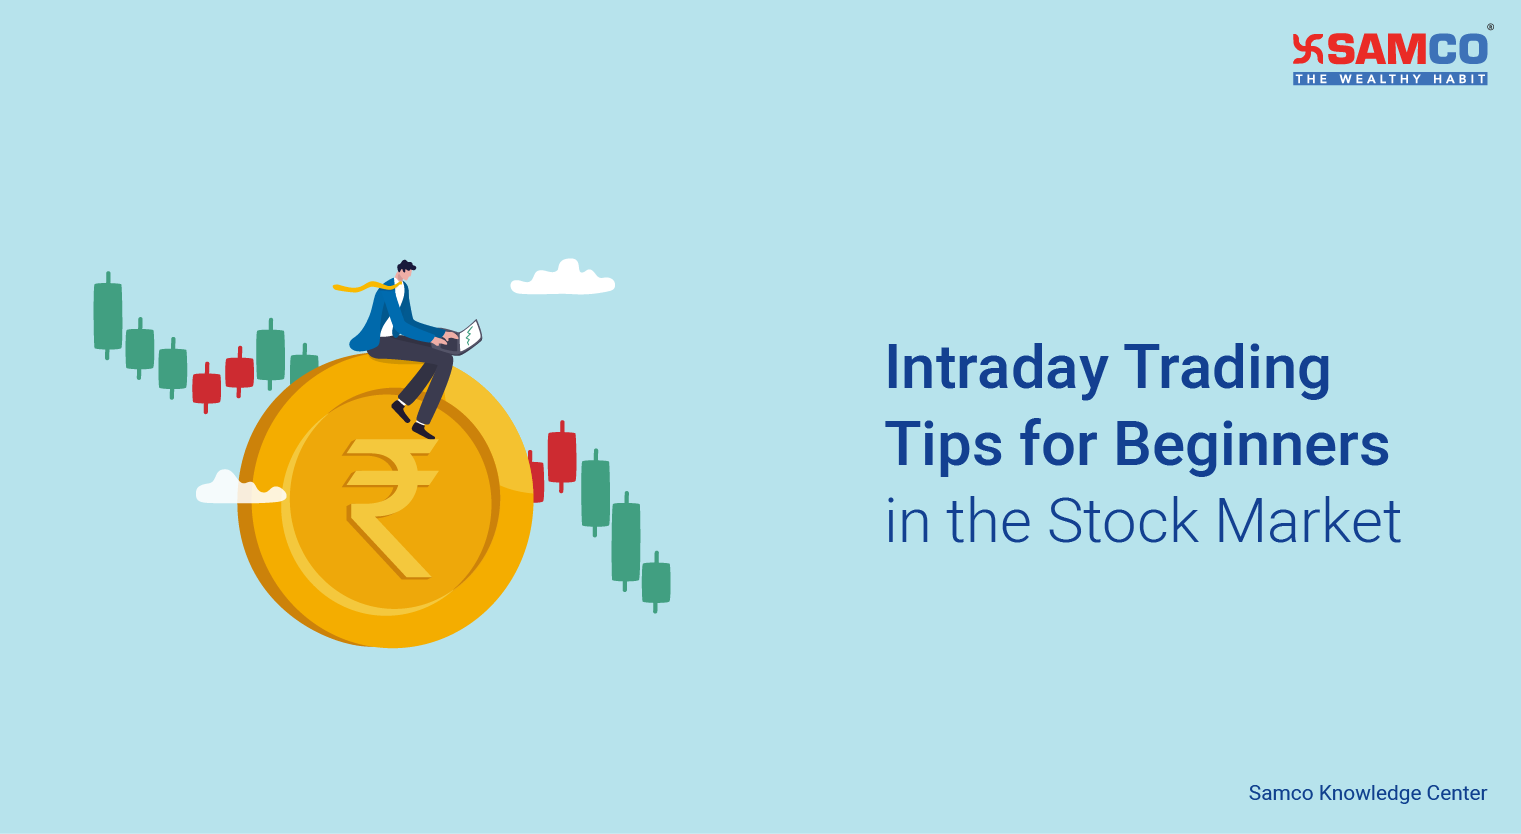  Intraday Trading Tips for Beginners in the Stock Market 